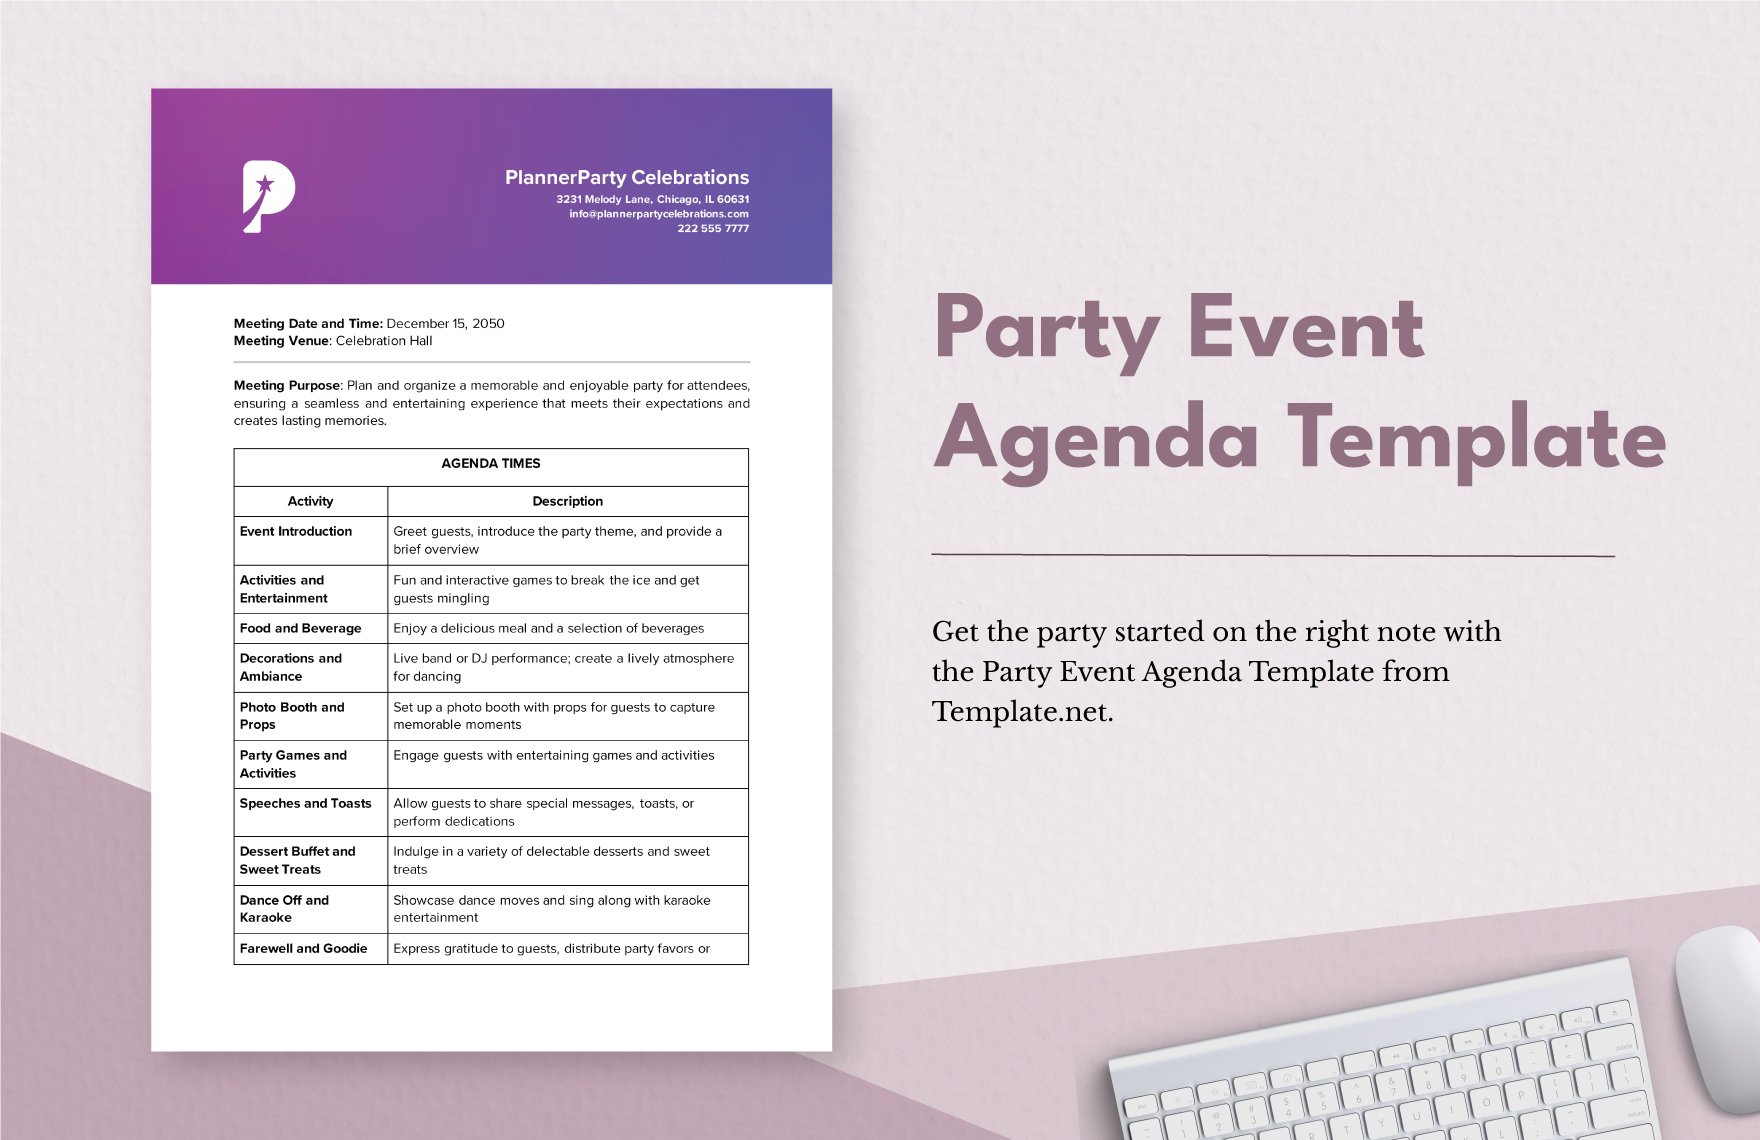 Party Event Agenda Template